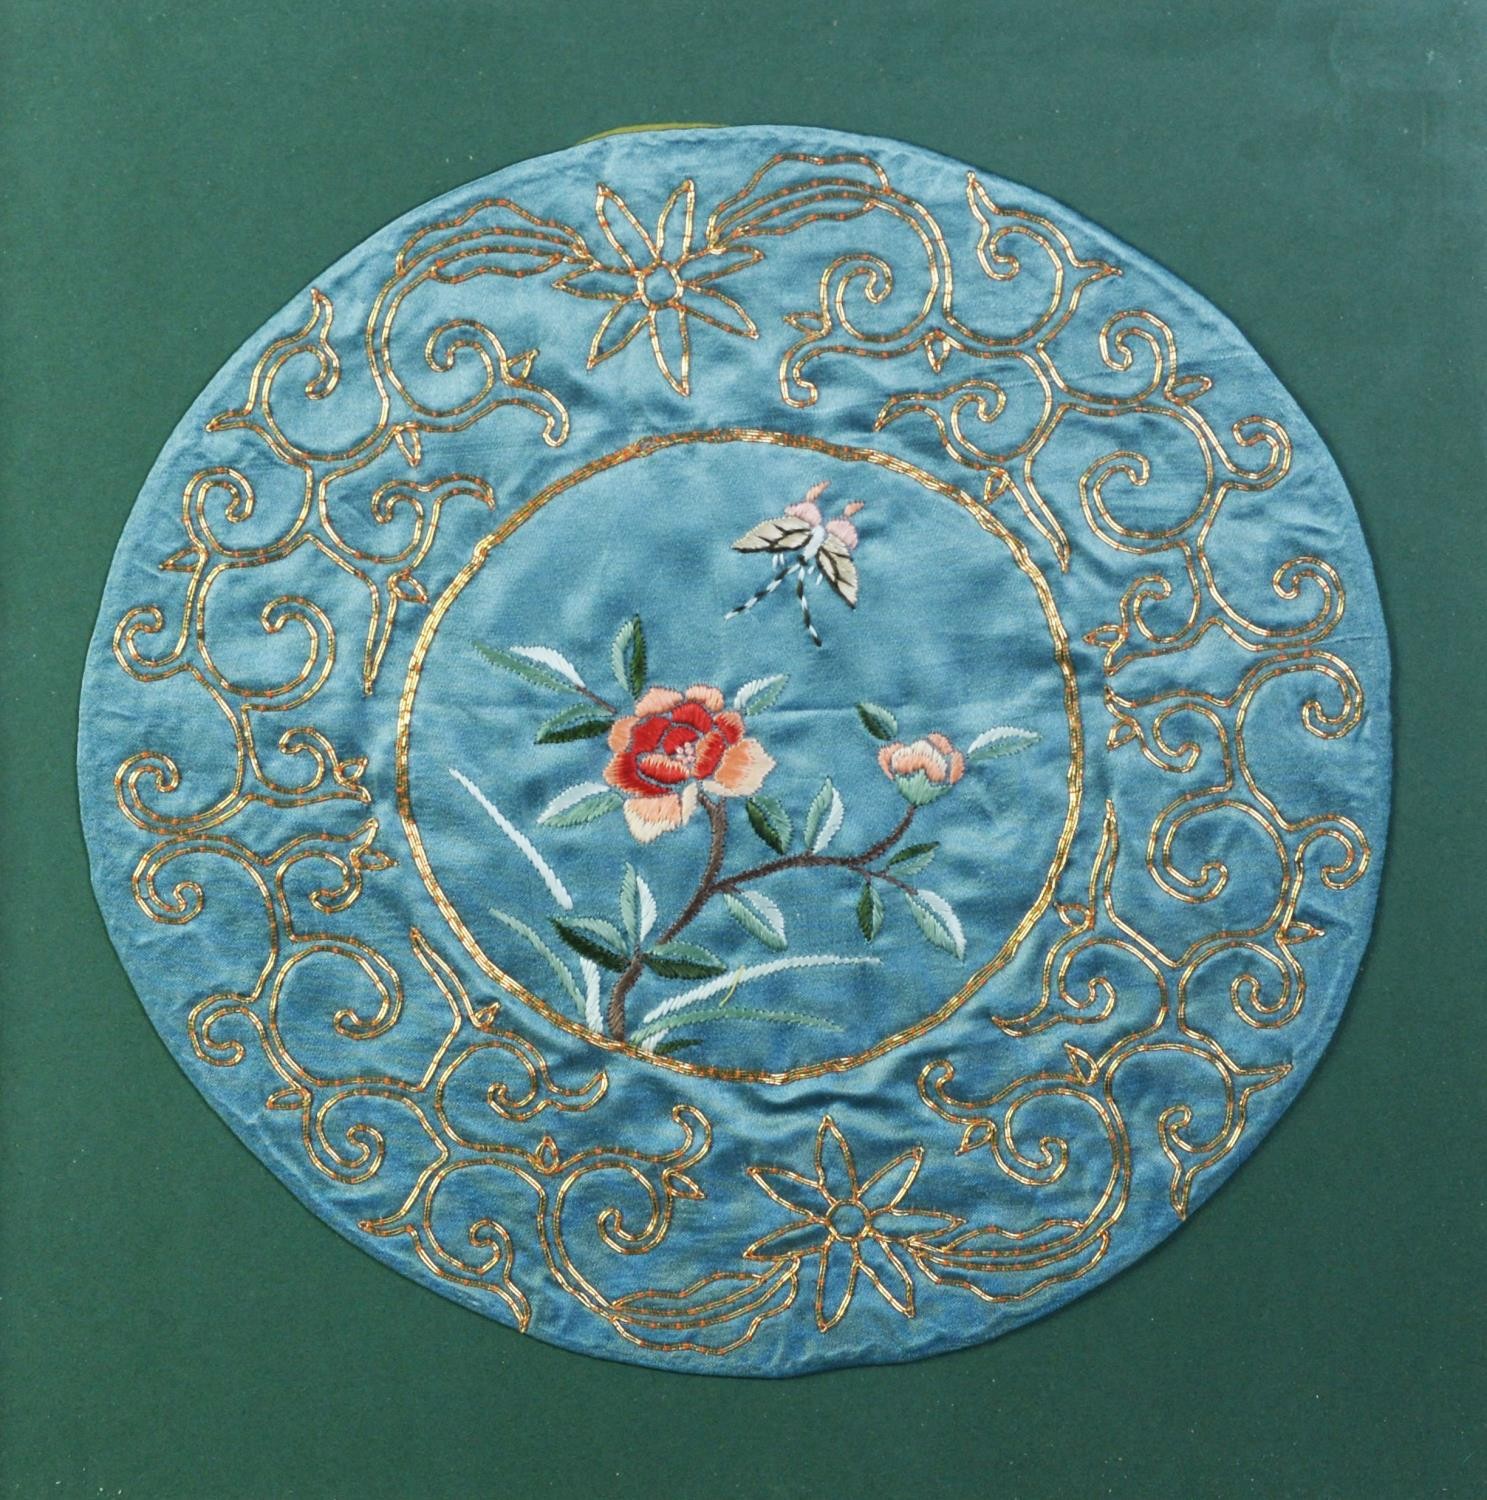 SIX CHINESE SILK NEEDLEWORK CIRCULAR PANELS, centred with flowers within a gilt foliate scroll